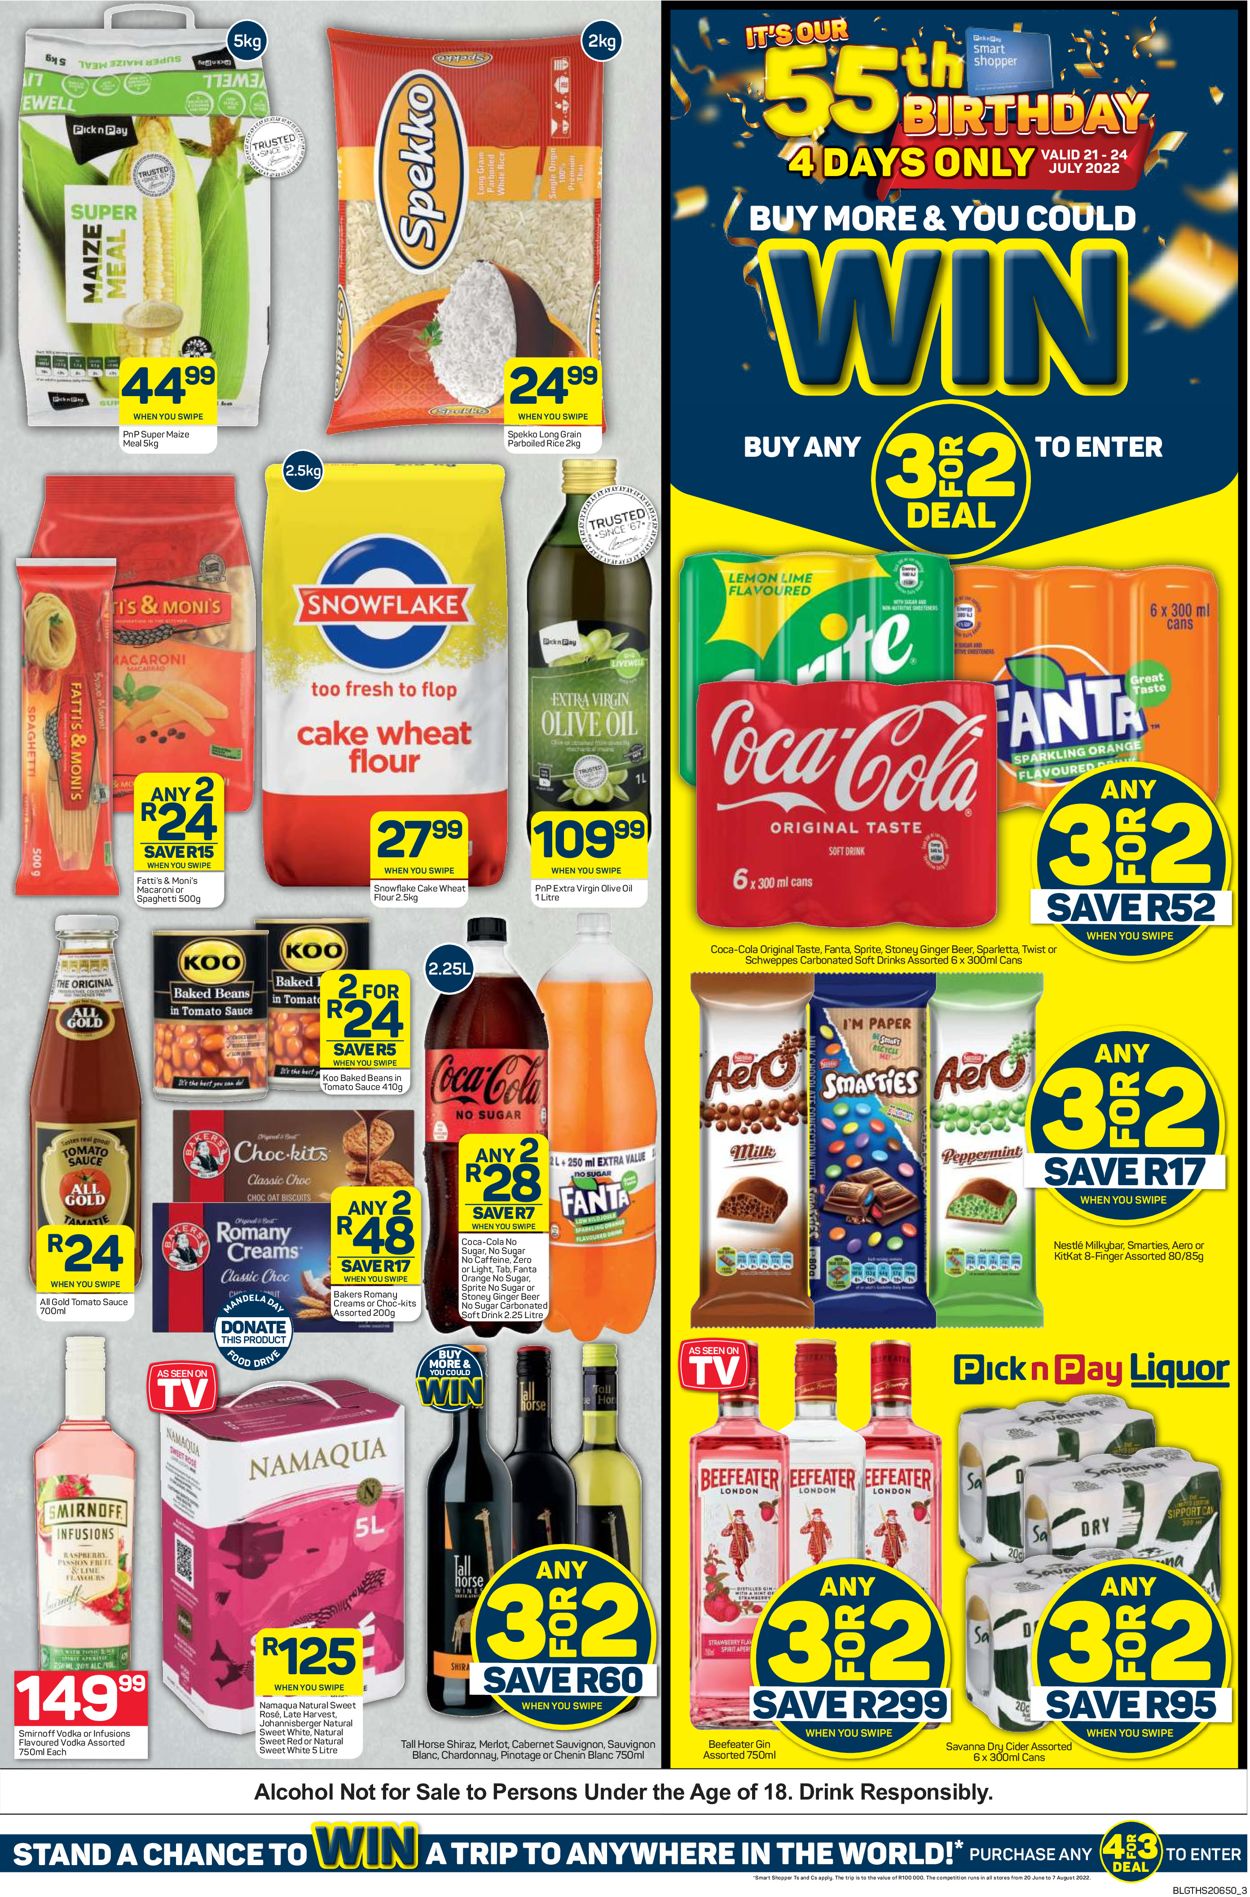 Pick n Pay Catalogue from 2022/07/21